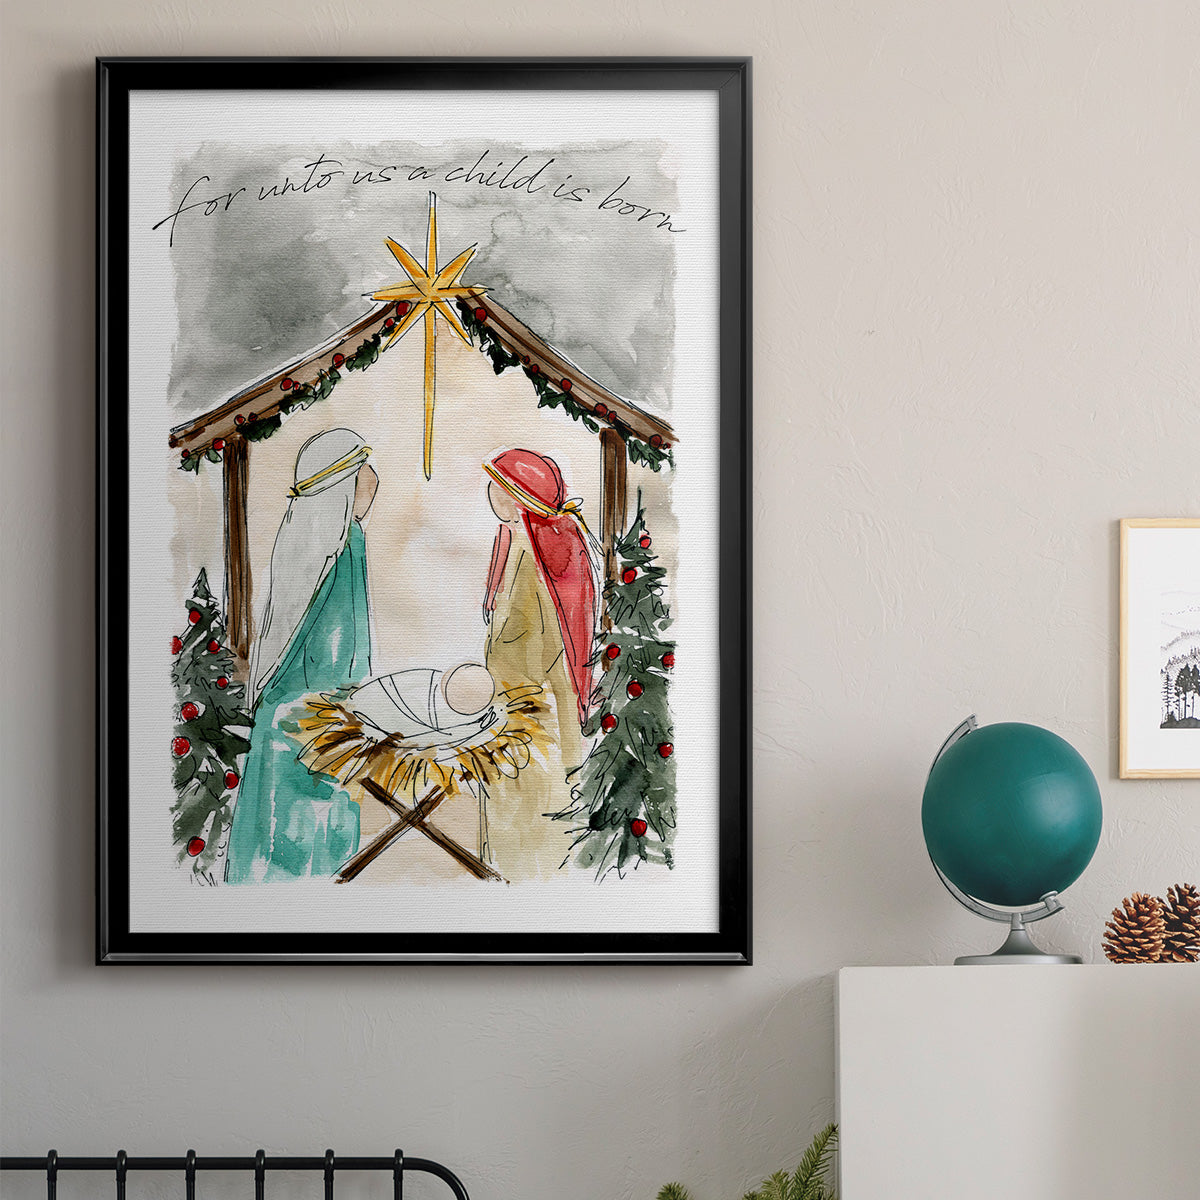 Unto Us A Child is Born Premium Framed Print - Ready to Hang